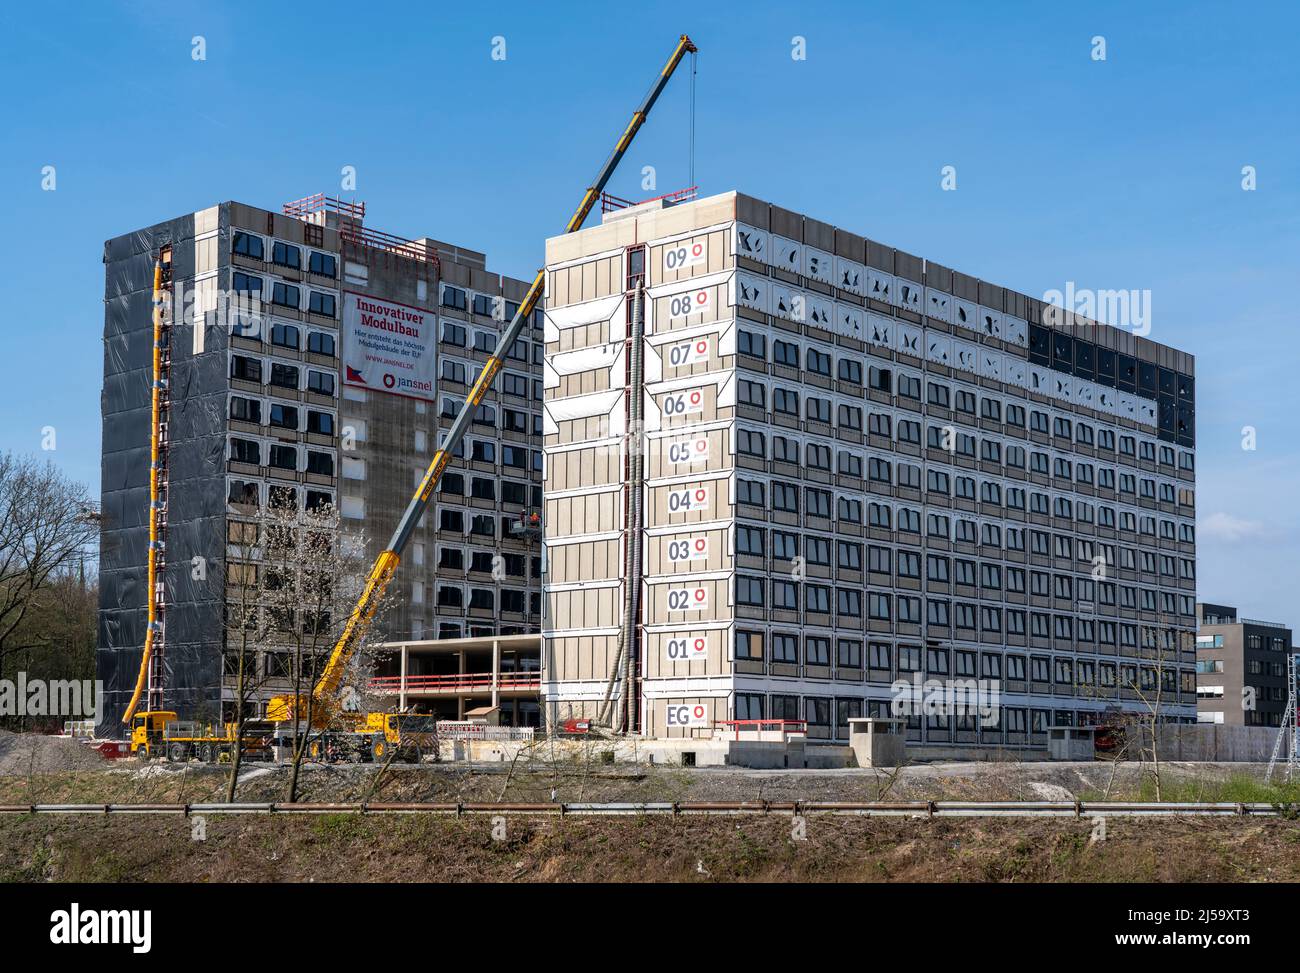 Construction site of the Community Campus, here 737 student flats, of 20 square metres each, are being built, completely furnished, in modular constru Stock Photo